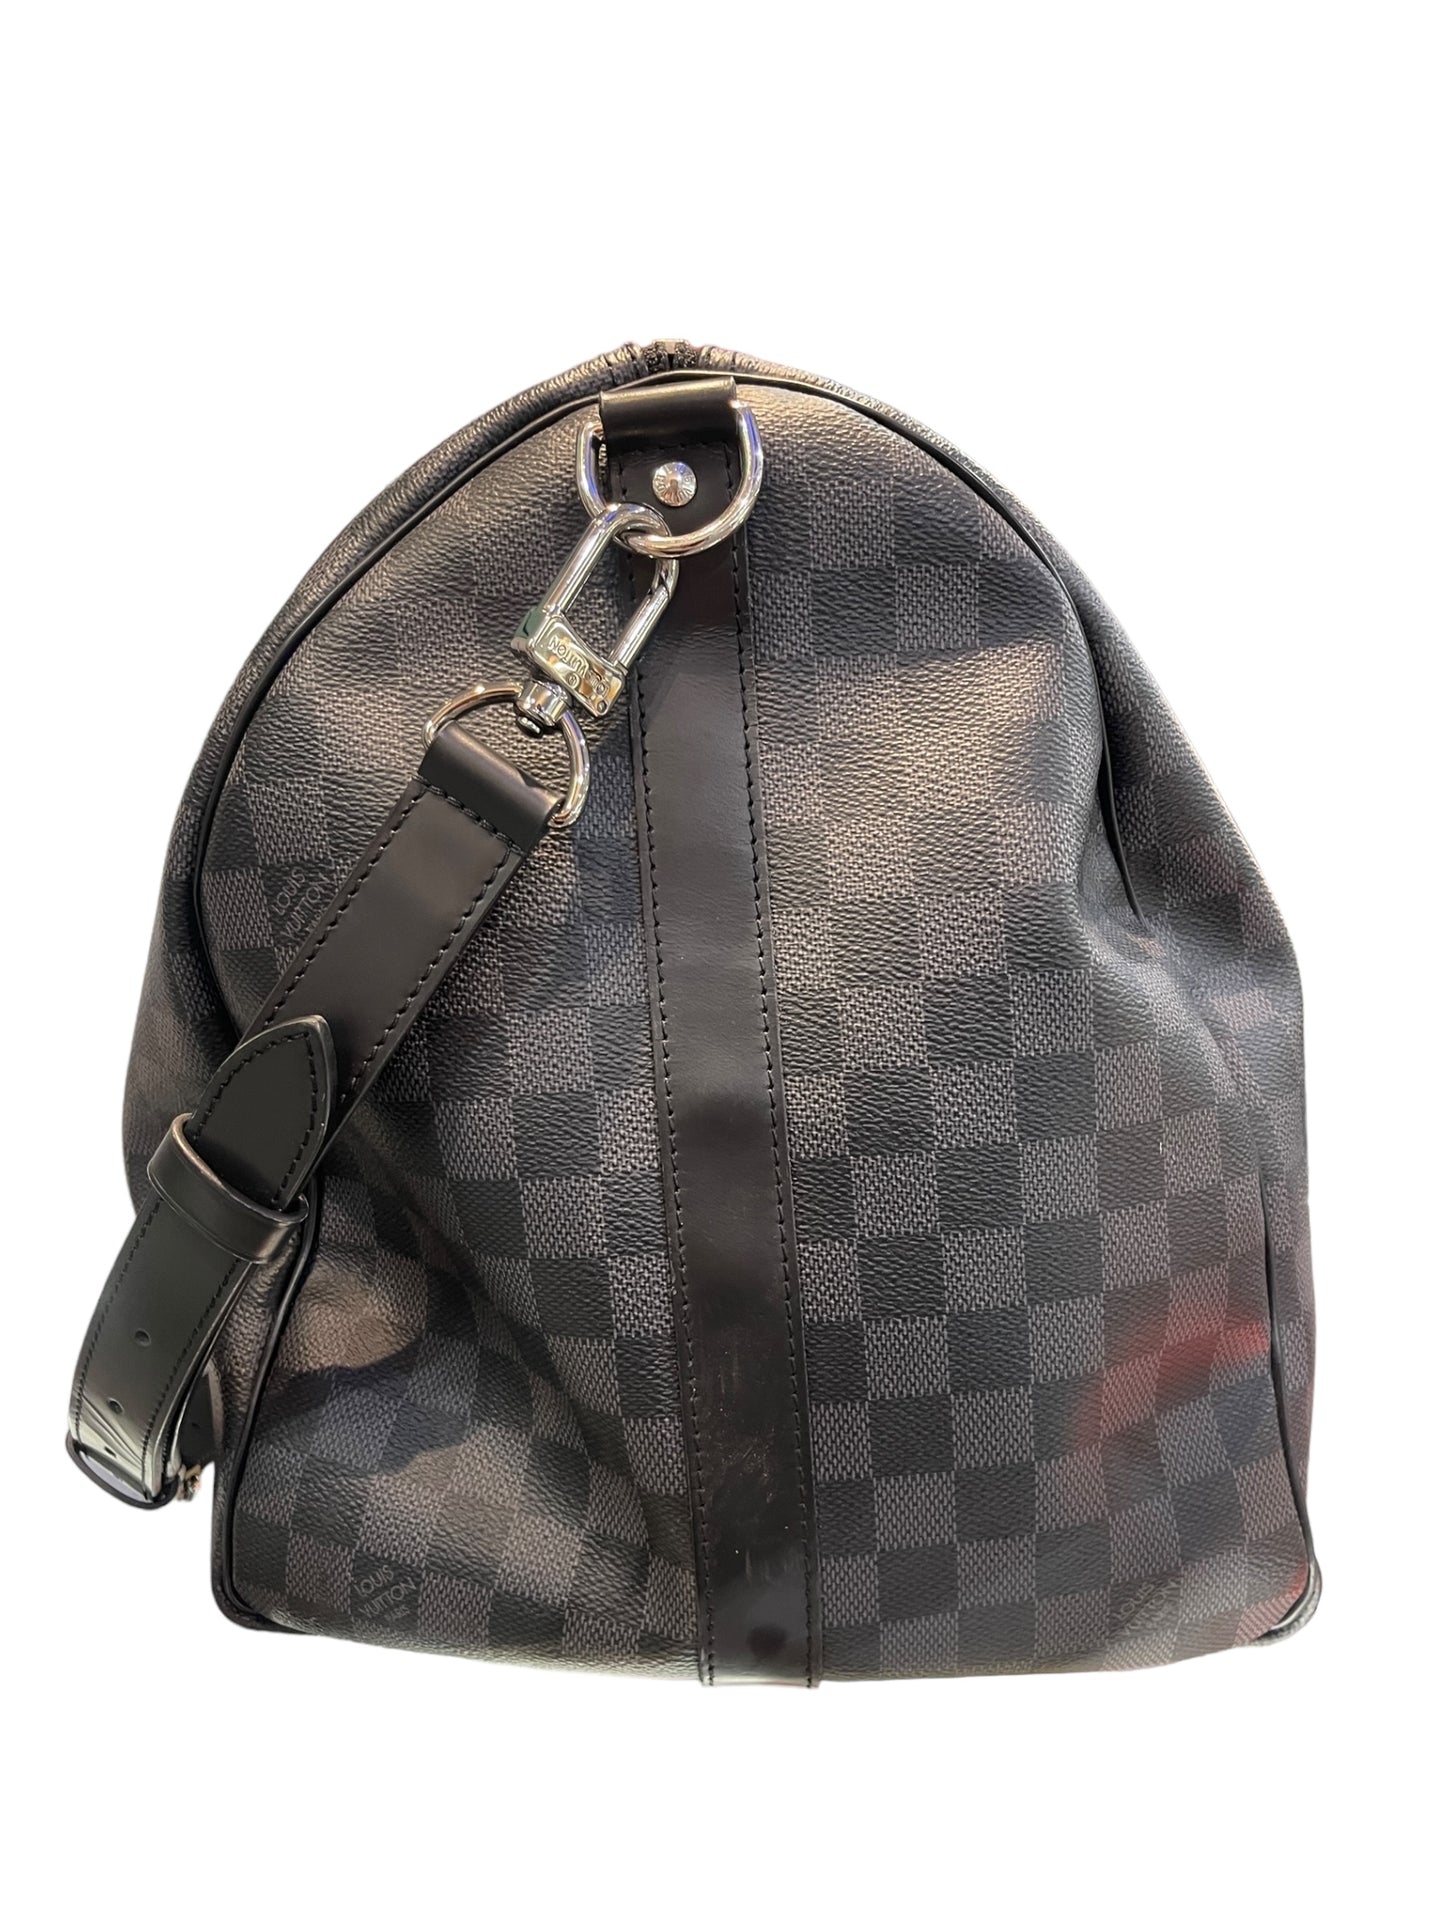 Louis Vuitton - Keepall 55 Bandouliere in Damier Graphite 0372626